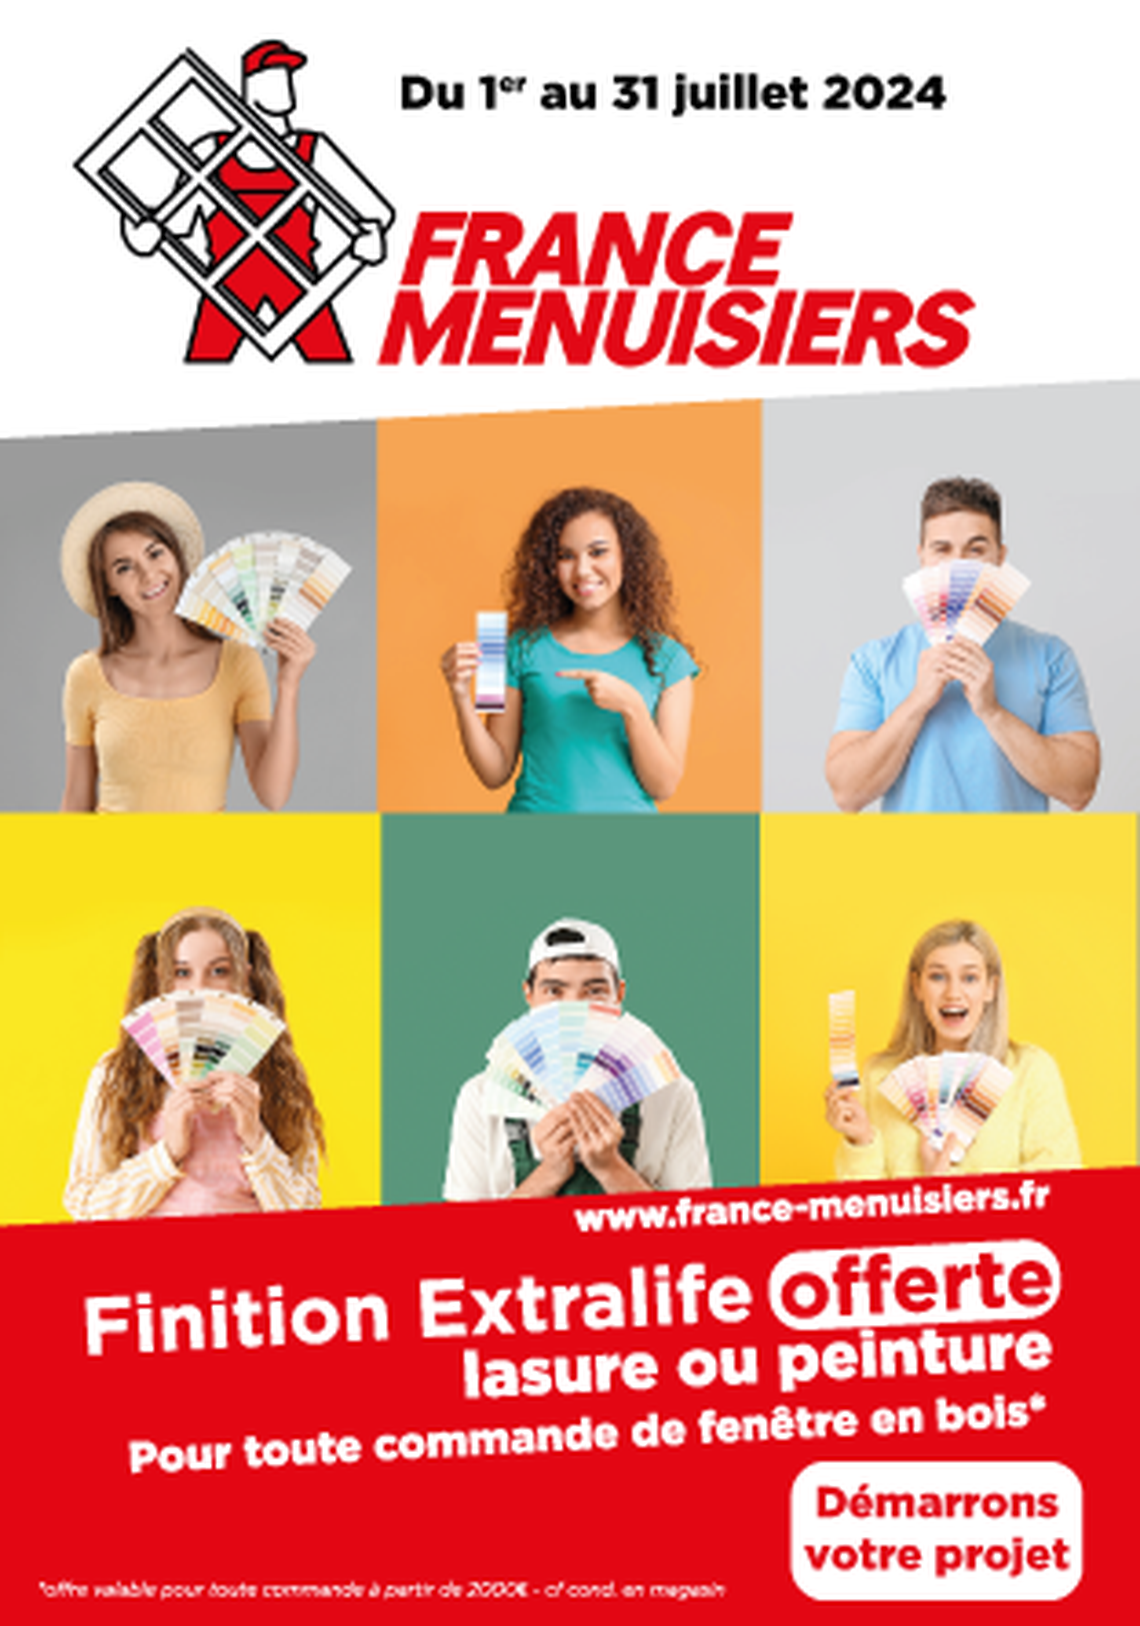 FRANCE MENUISIERS Angoulême - Finition Extralife Offerte